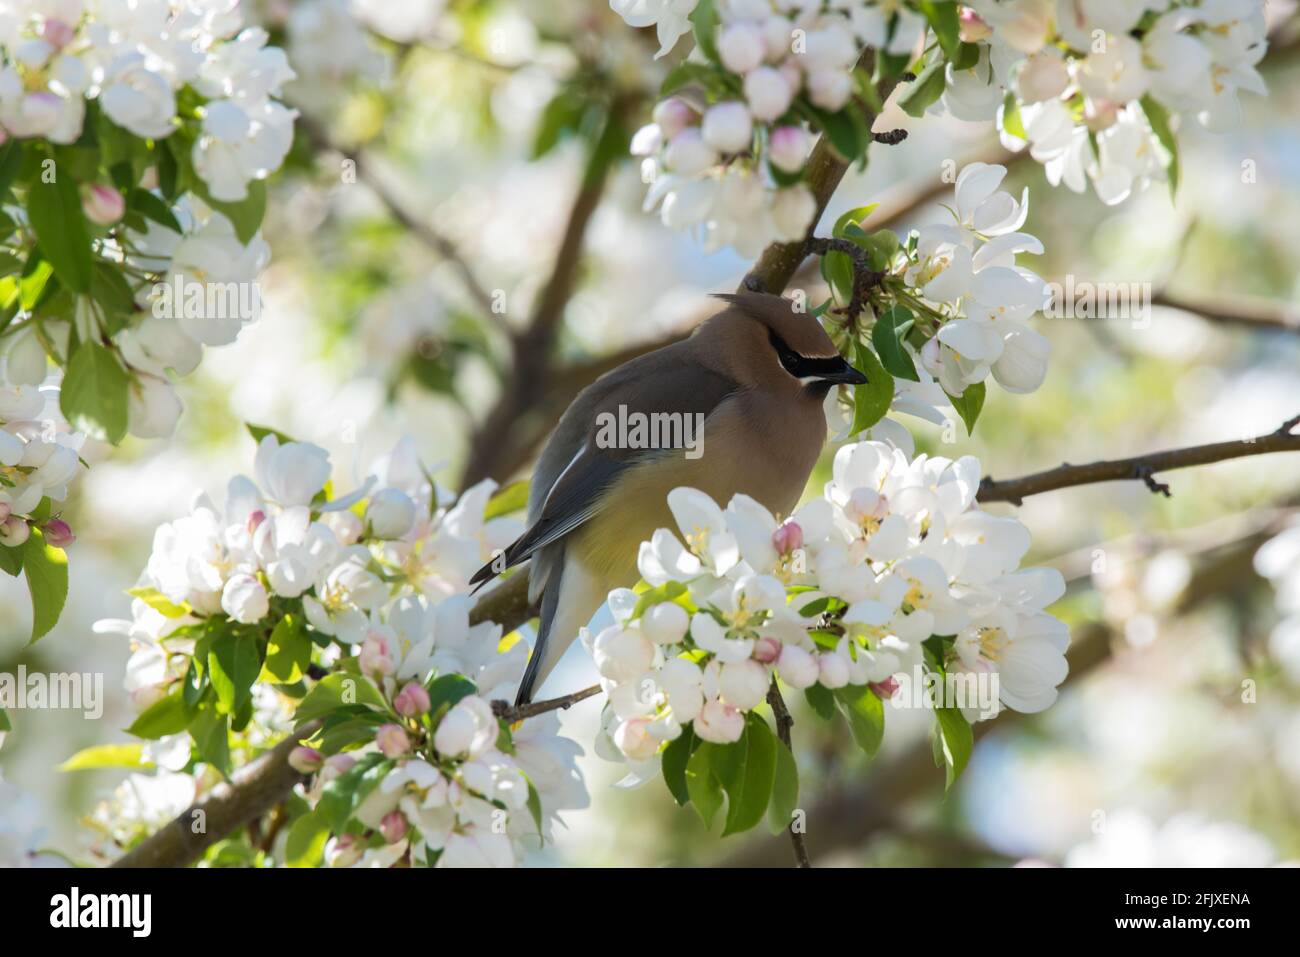 Cedar Waxwings foraging in a blossoming crabapple tree.  These delicate, migratory birds feed on insects and a wide variety of fruits and berries. Stock Photo